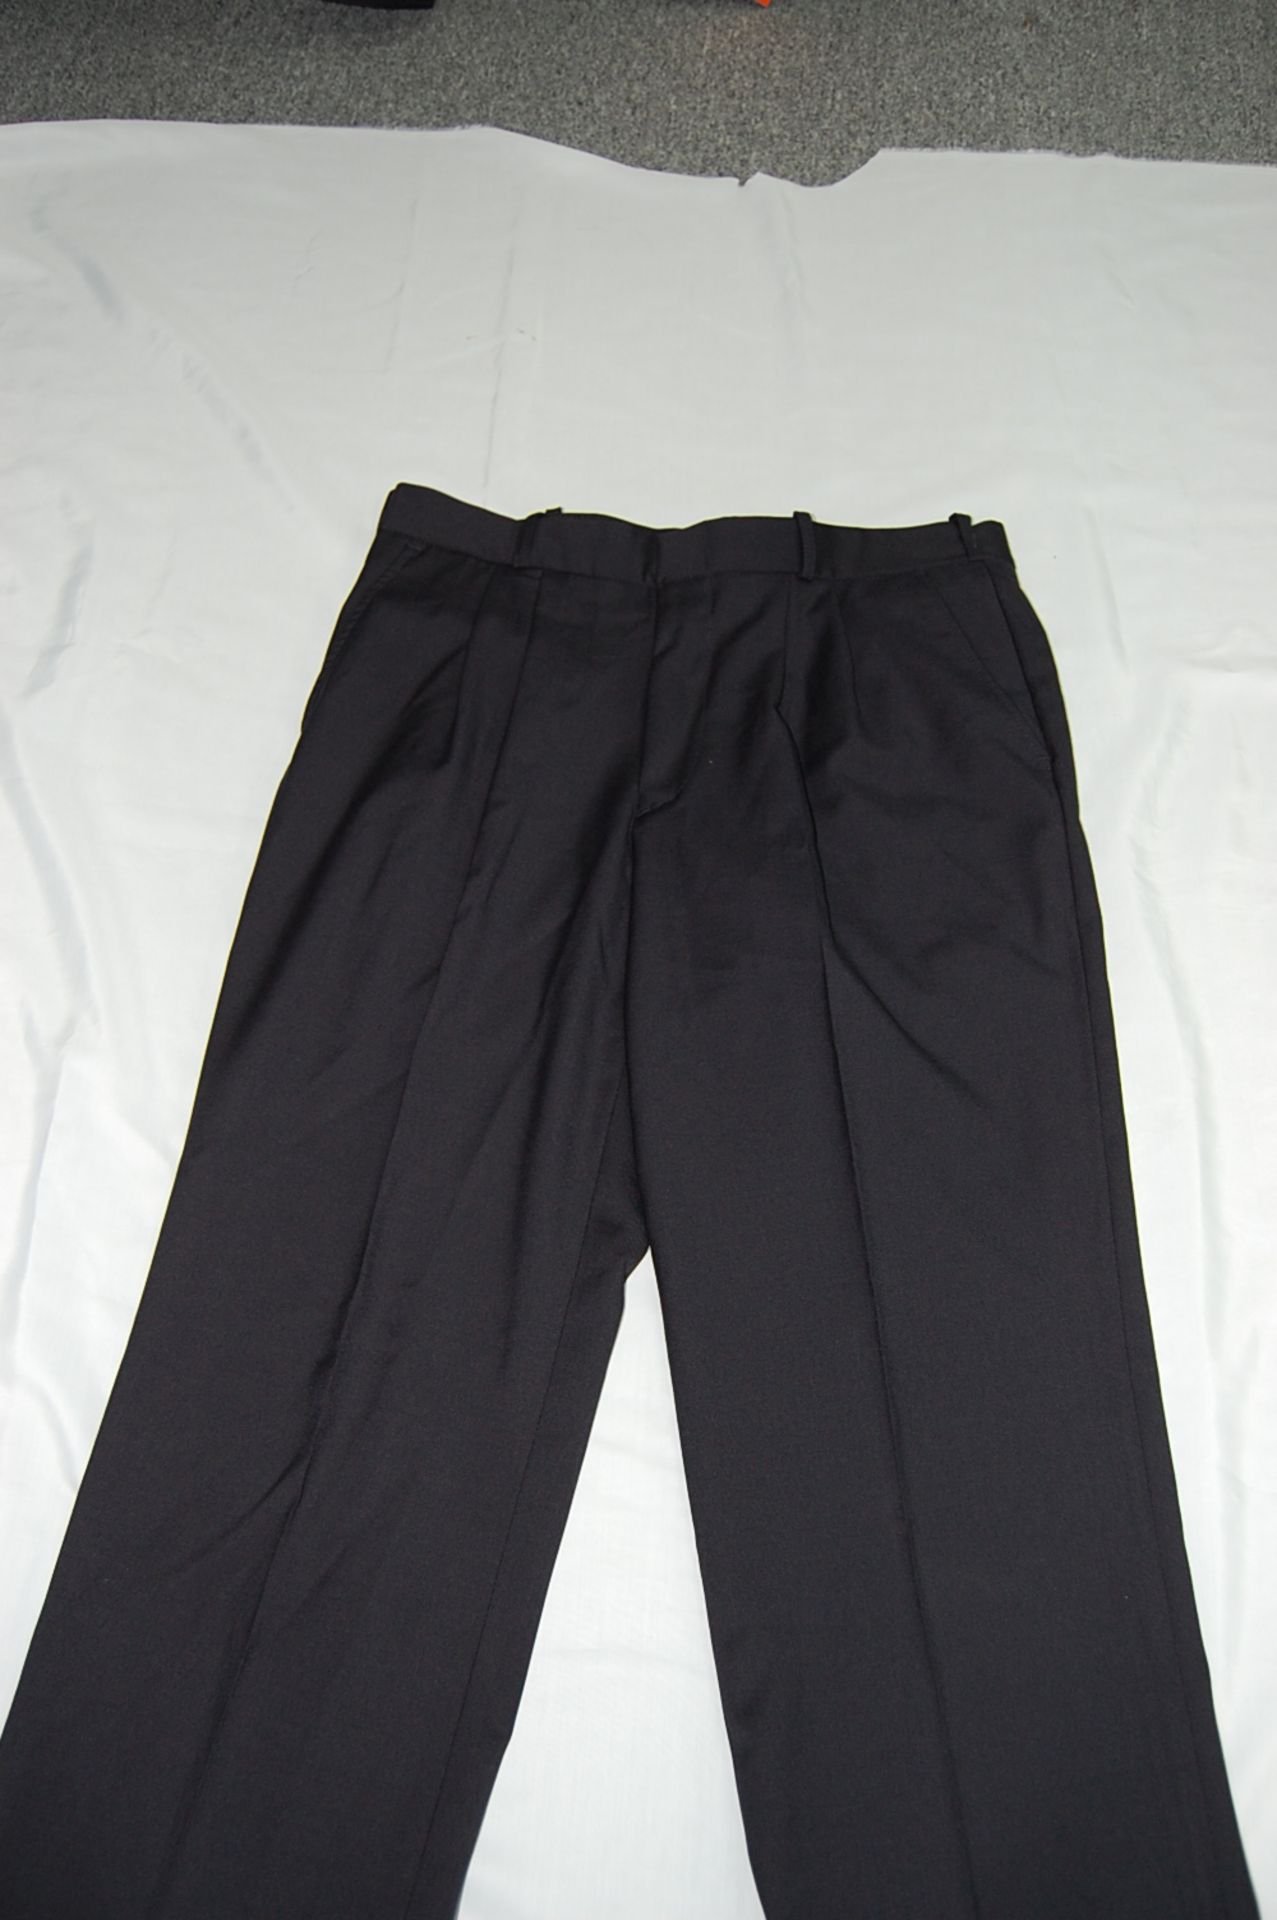 Navy Pleated Men's Pants 100% Polyester, size 34 - Image 2 of 2